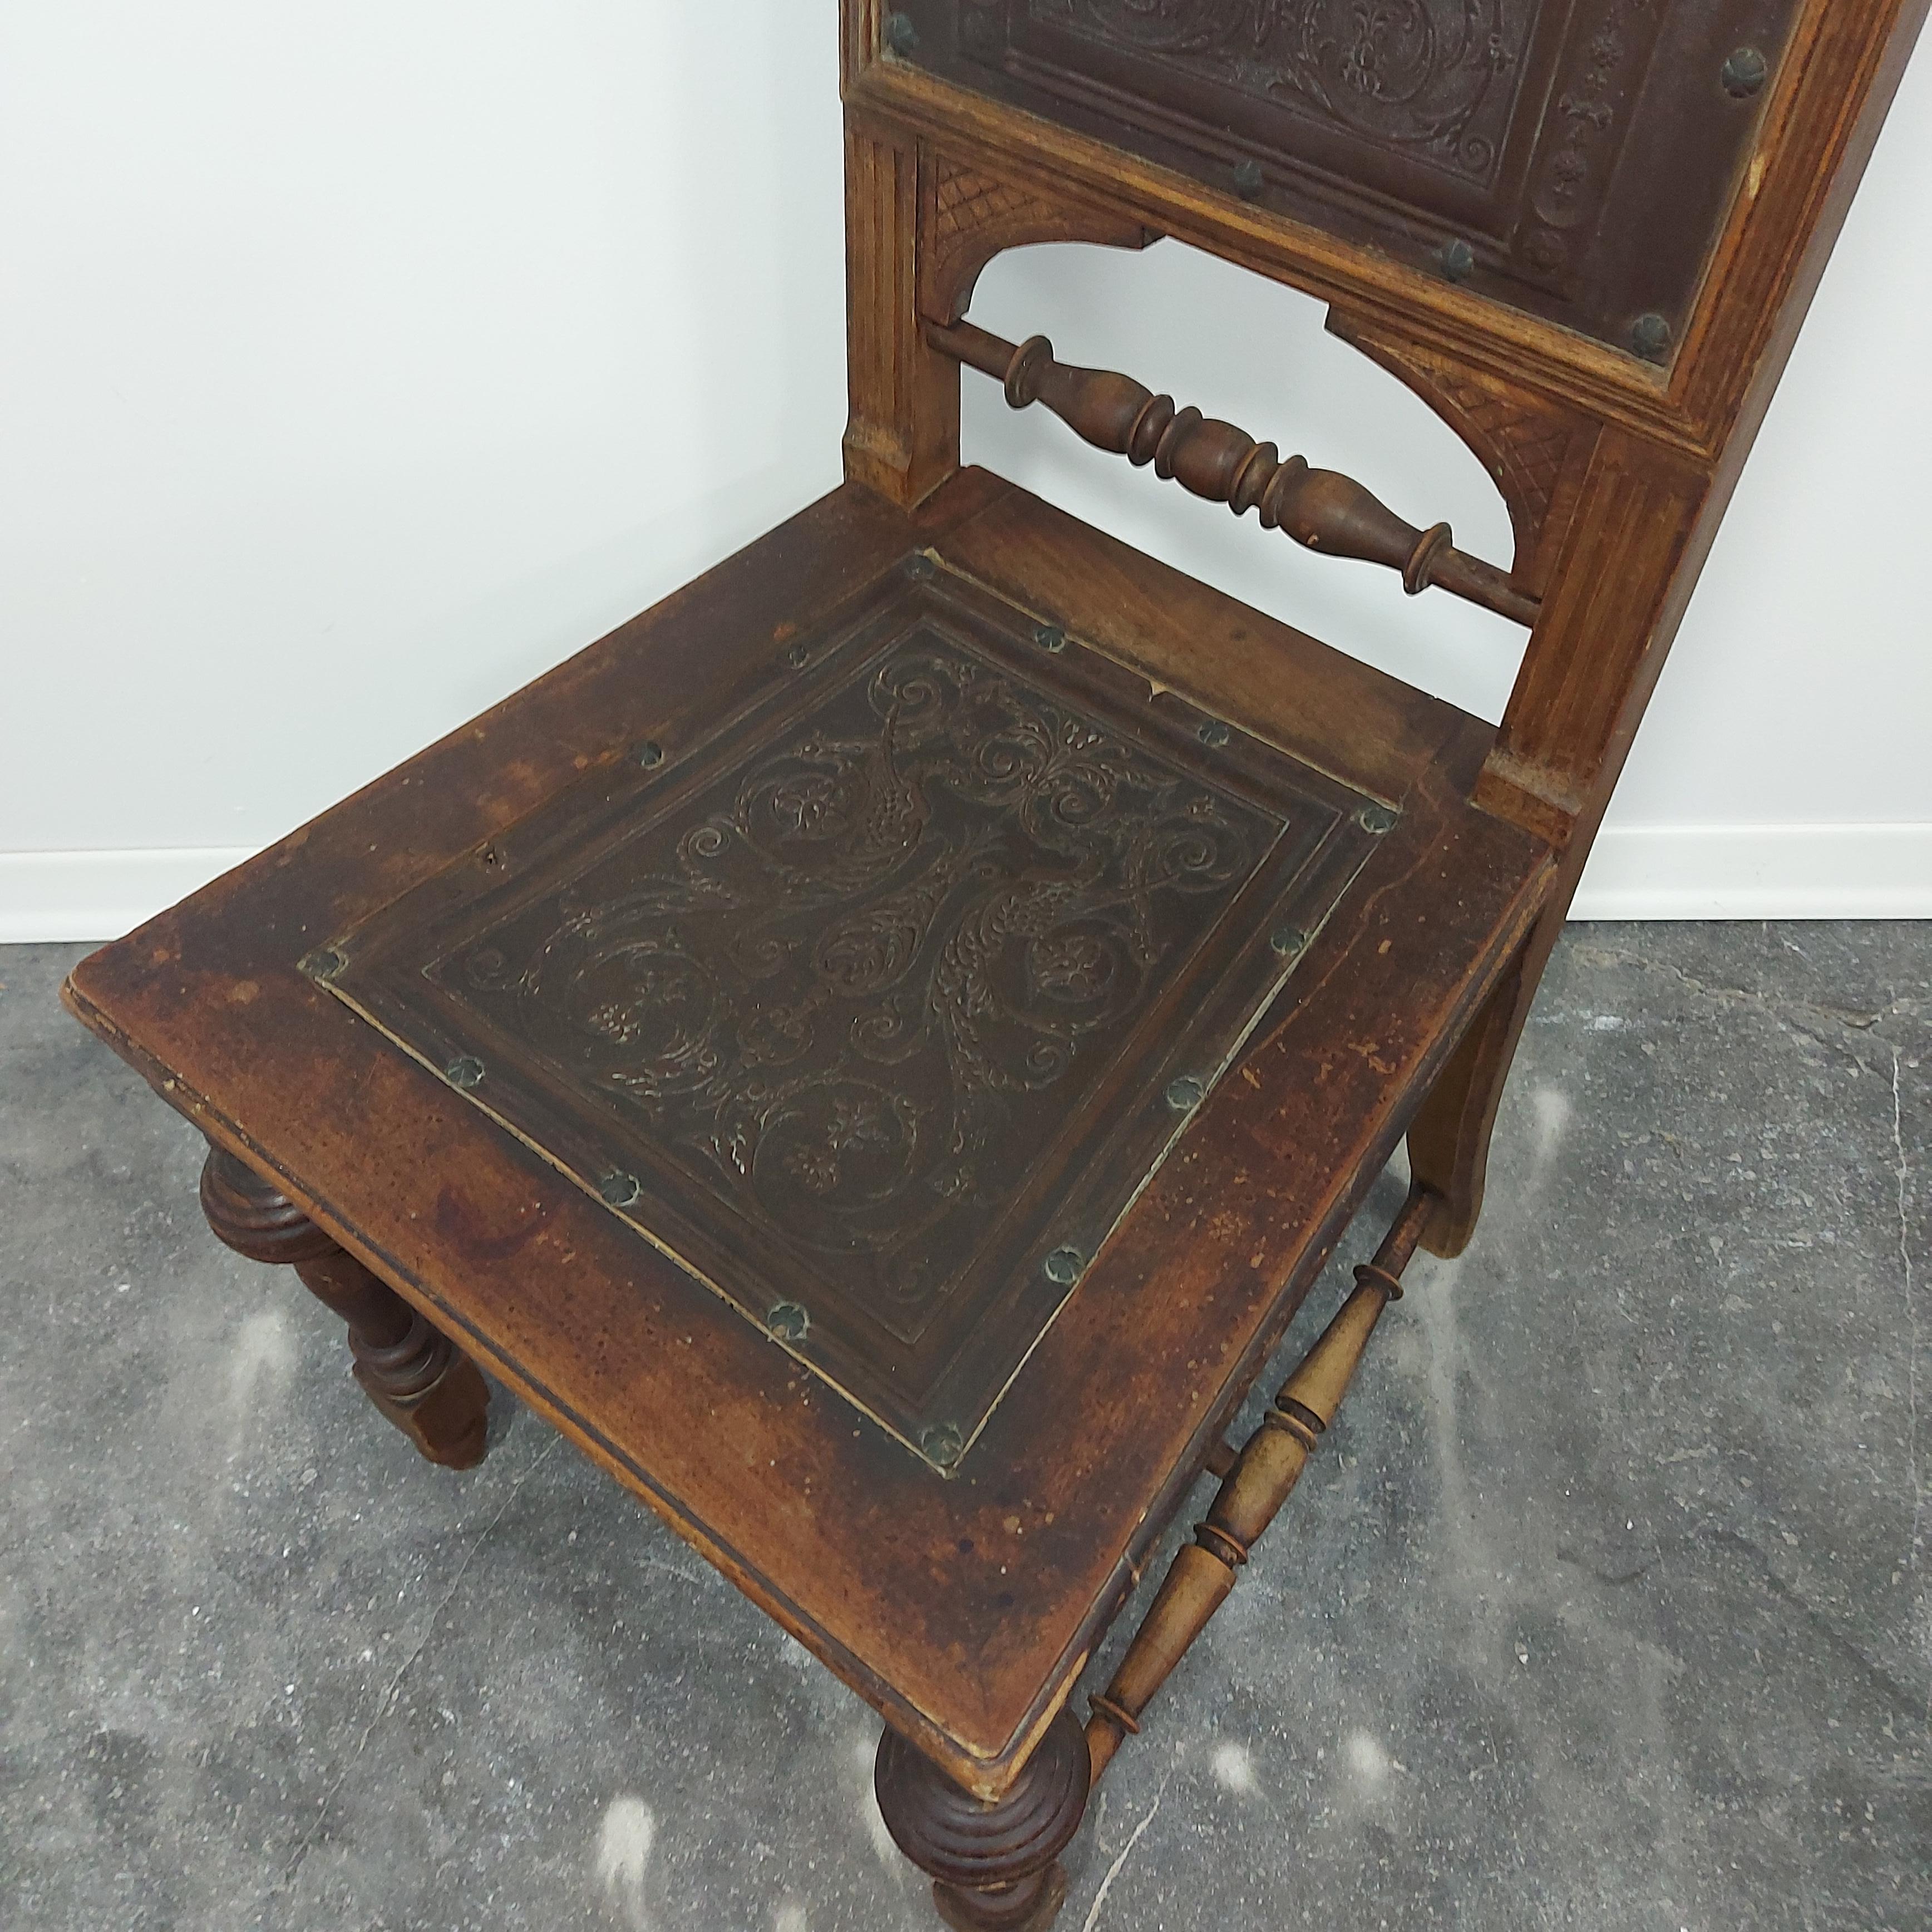 Chair 1930s.

Well preserved in great firm condition.

Rare find.

Material: Leather, Oak Hardwood